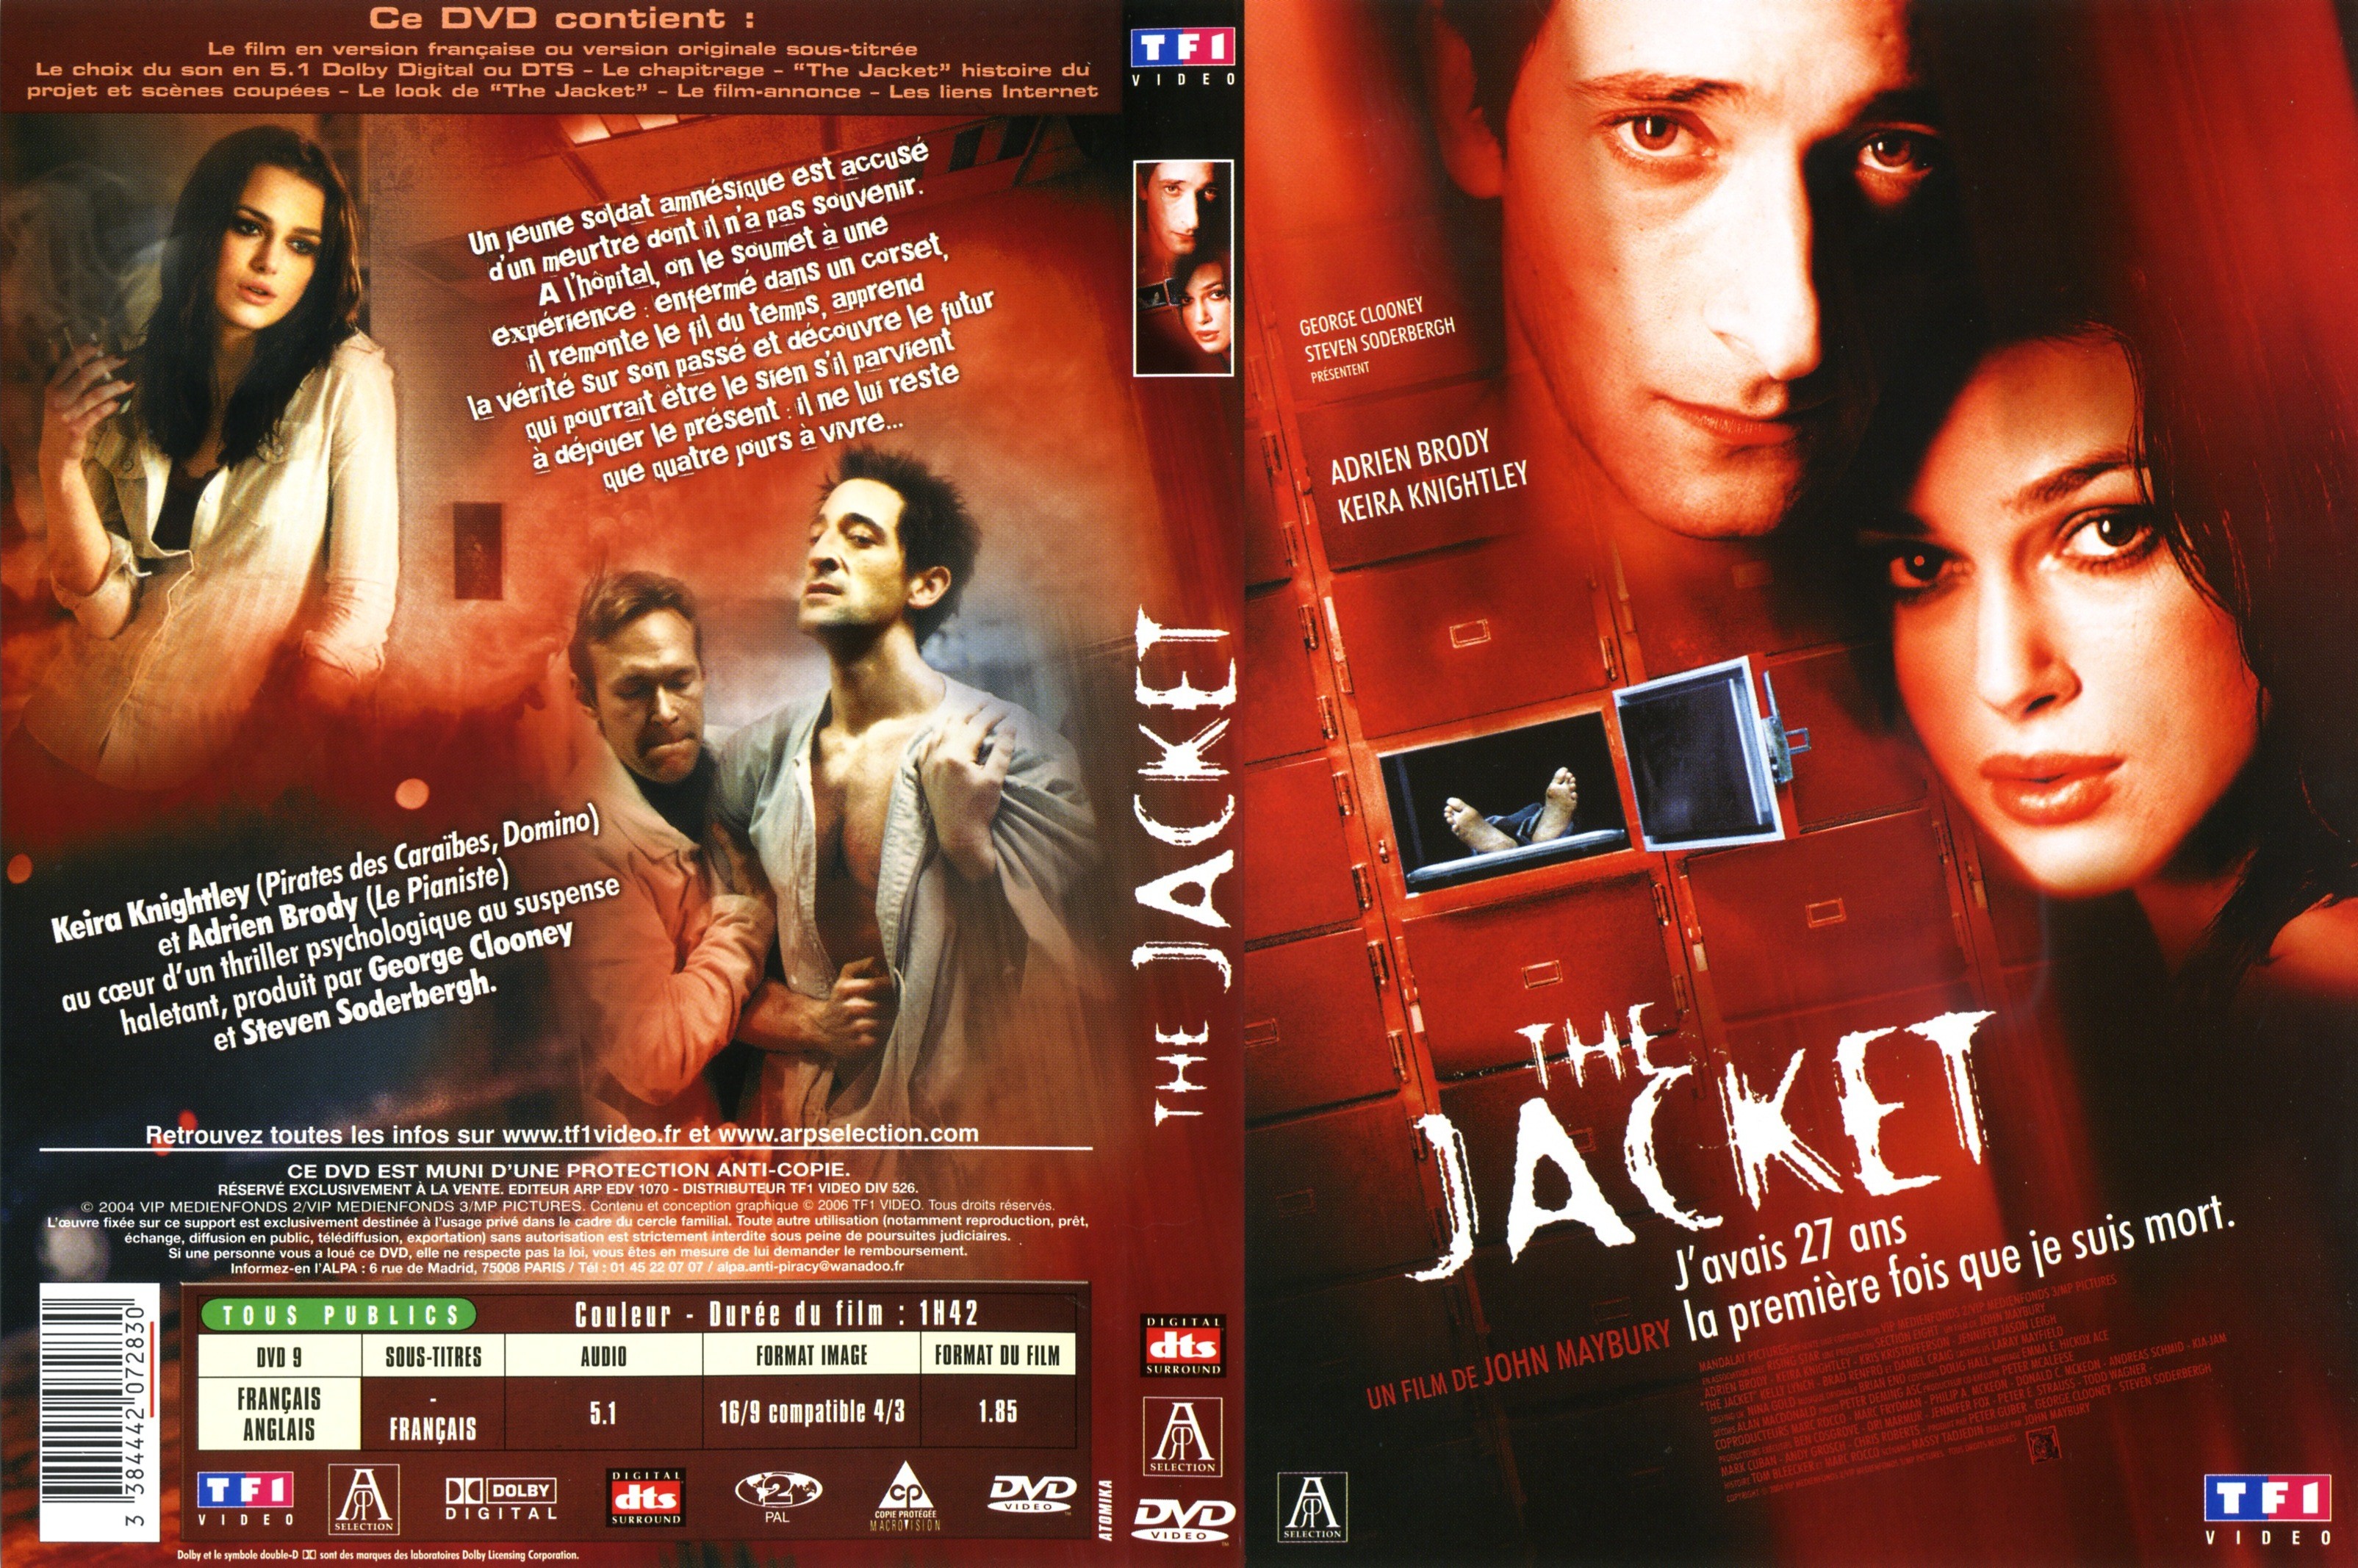 Jaquette DVD The jacket